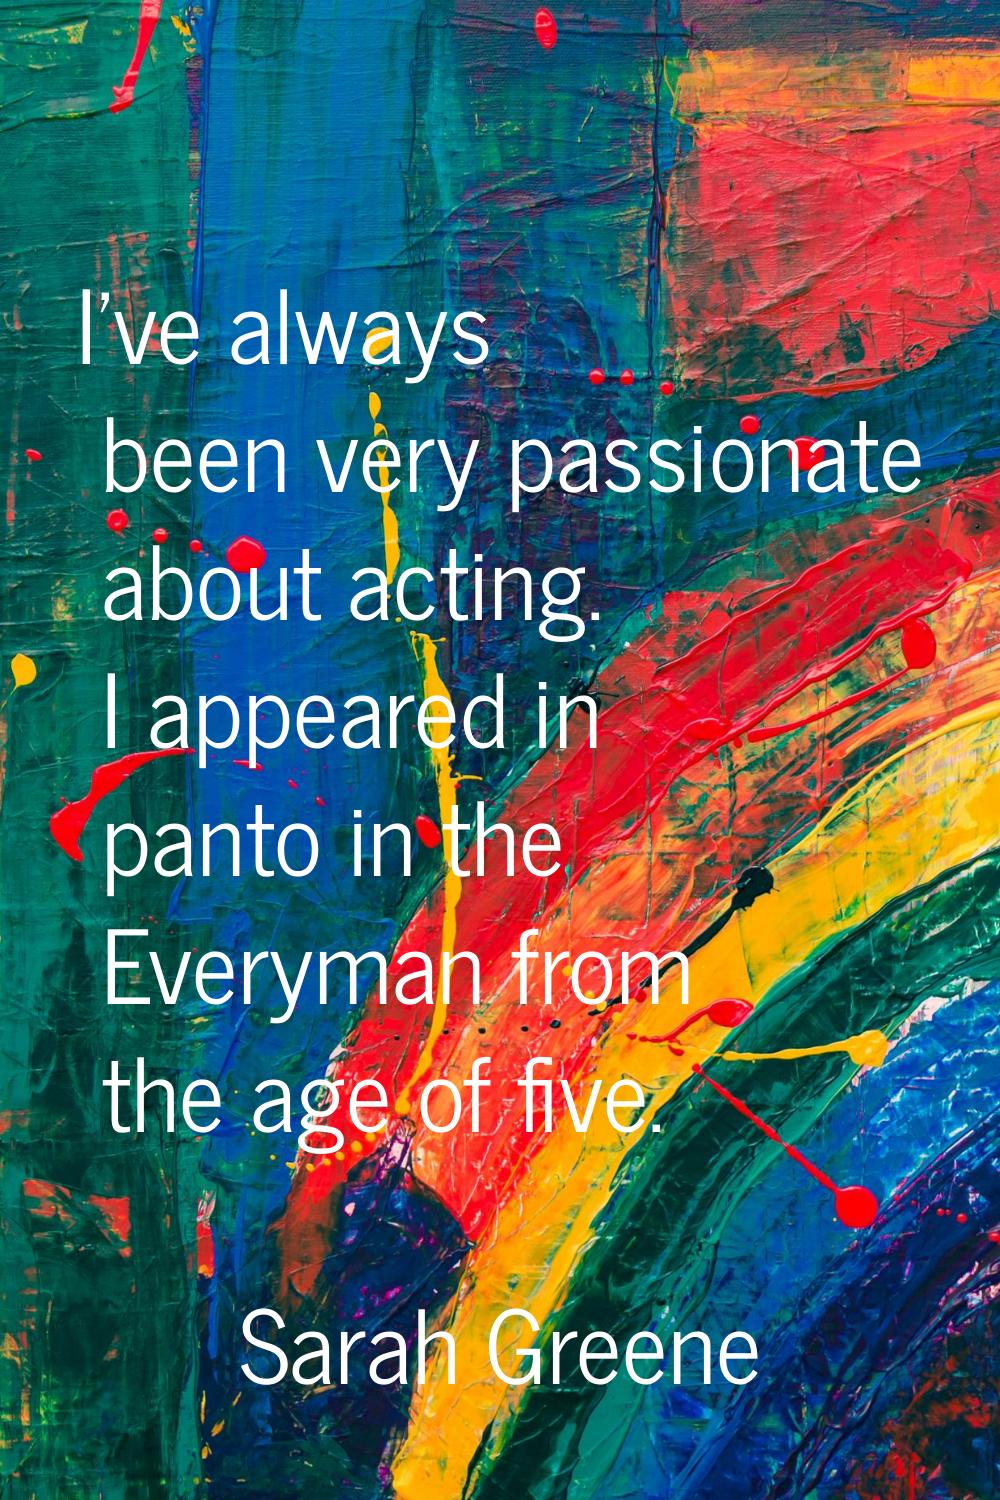 I've always been very passionate about acting. I appeared in panto in the Everyman from the age of 